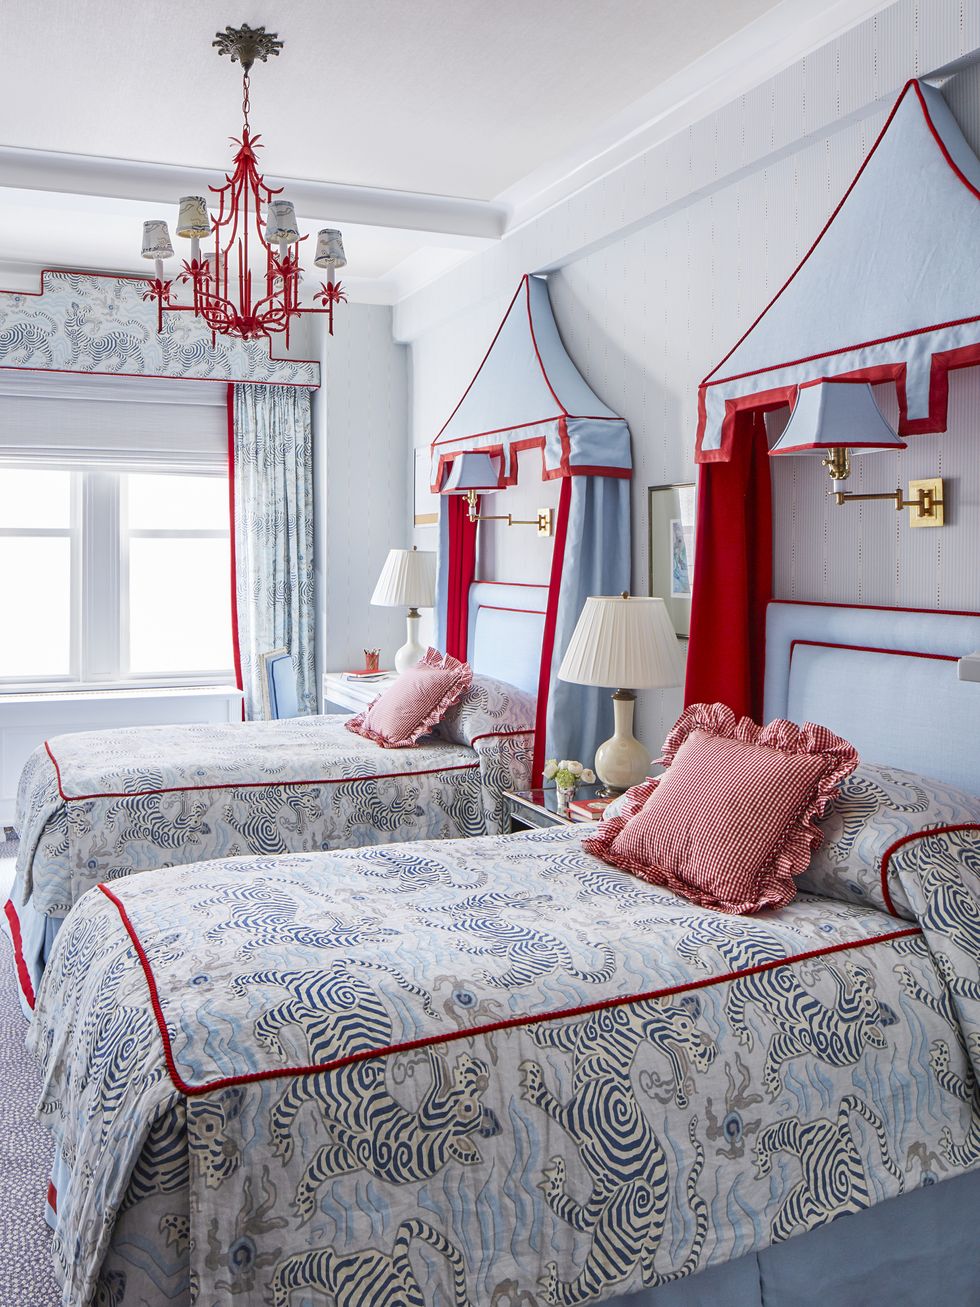 in daughter kingsley’s room, tomato red trim by kravet and a painted wrought iron chan­delier crown a sweep of soft blues